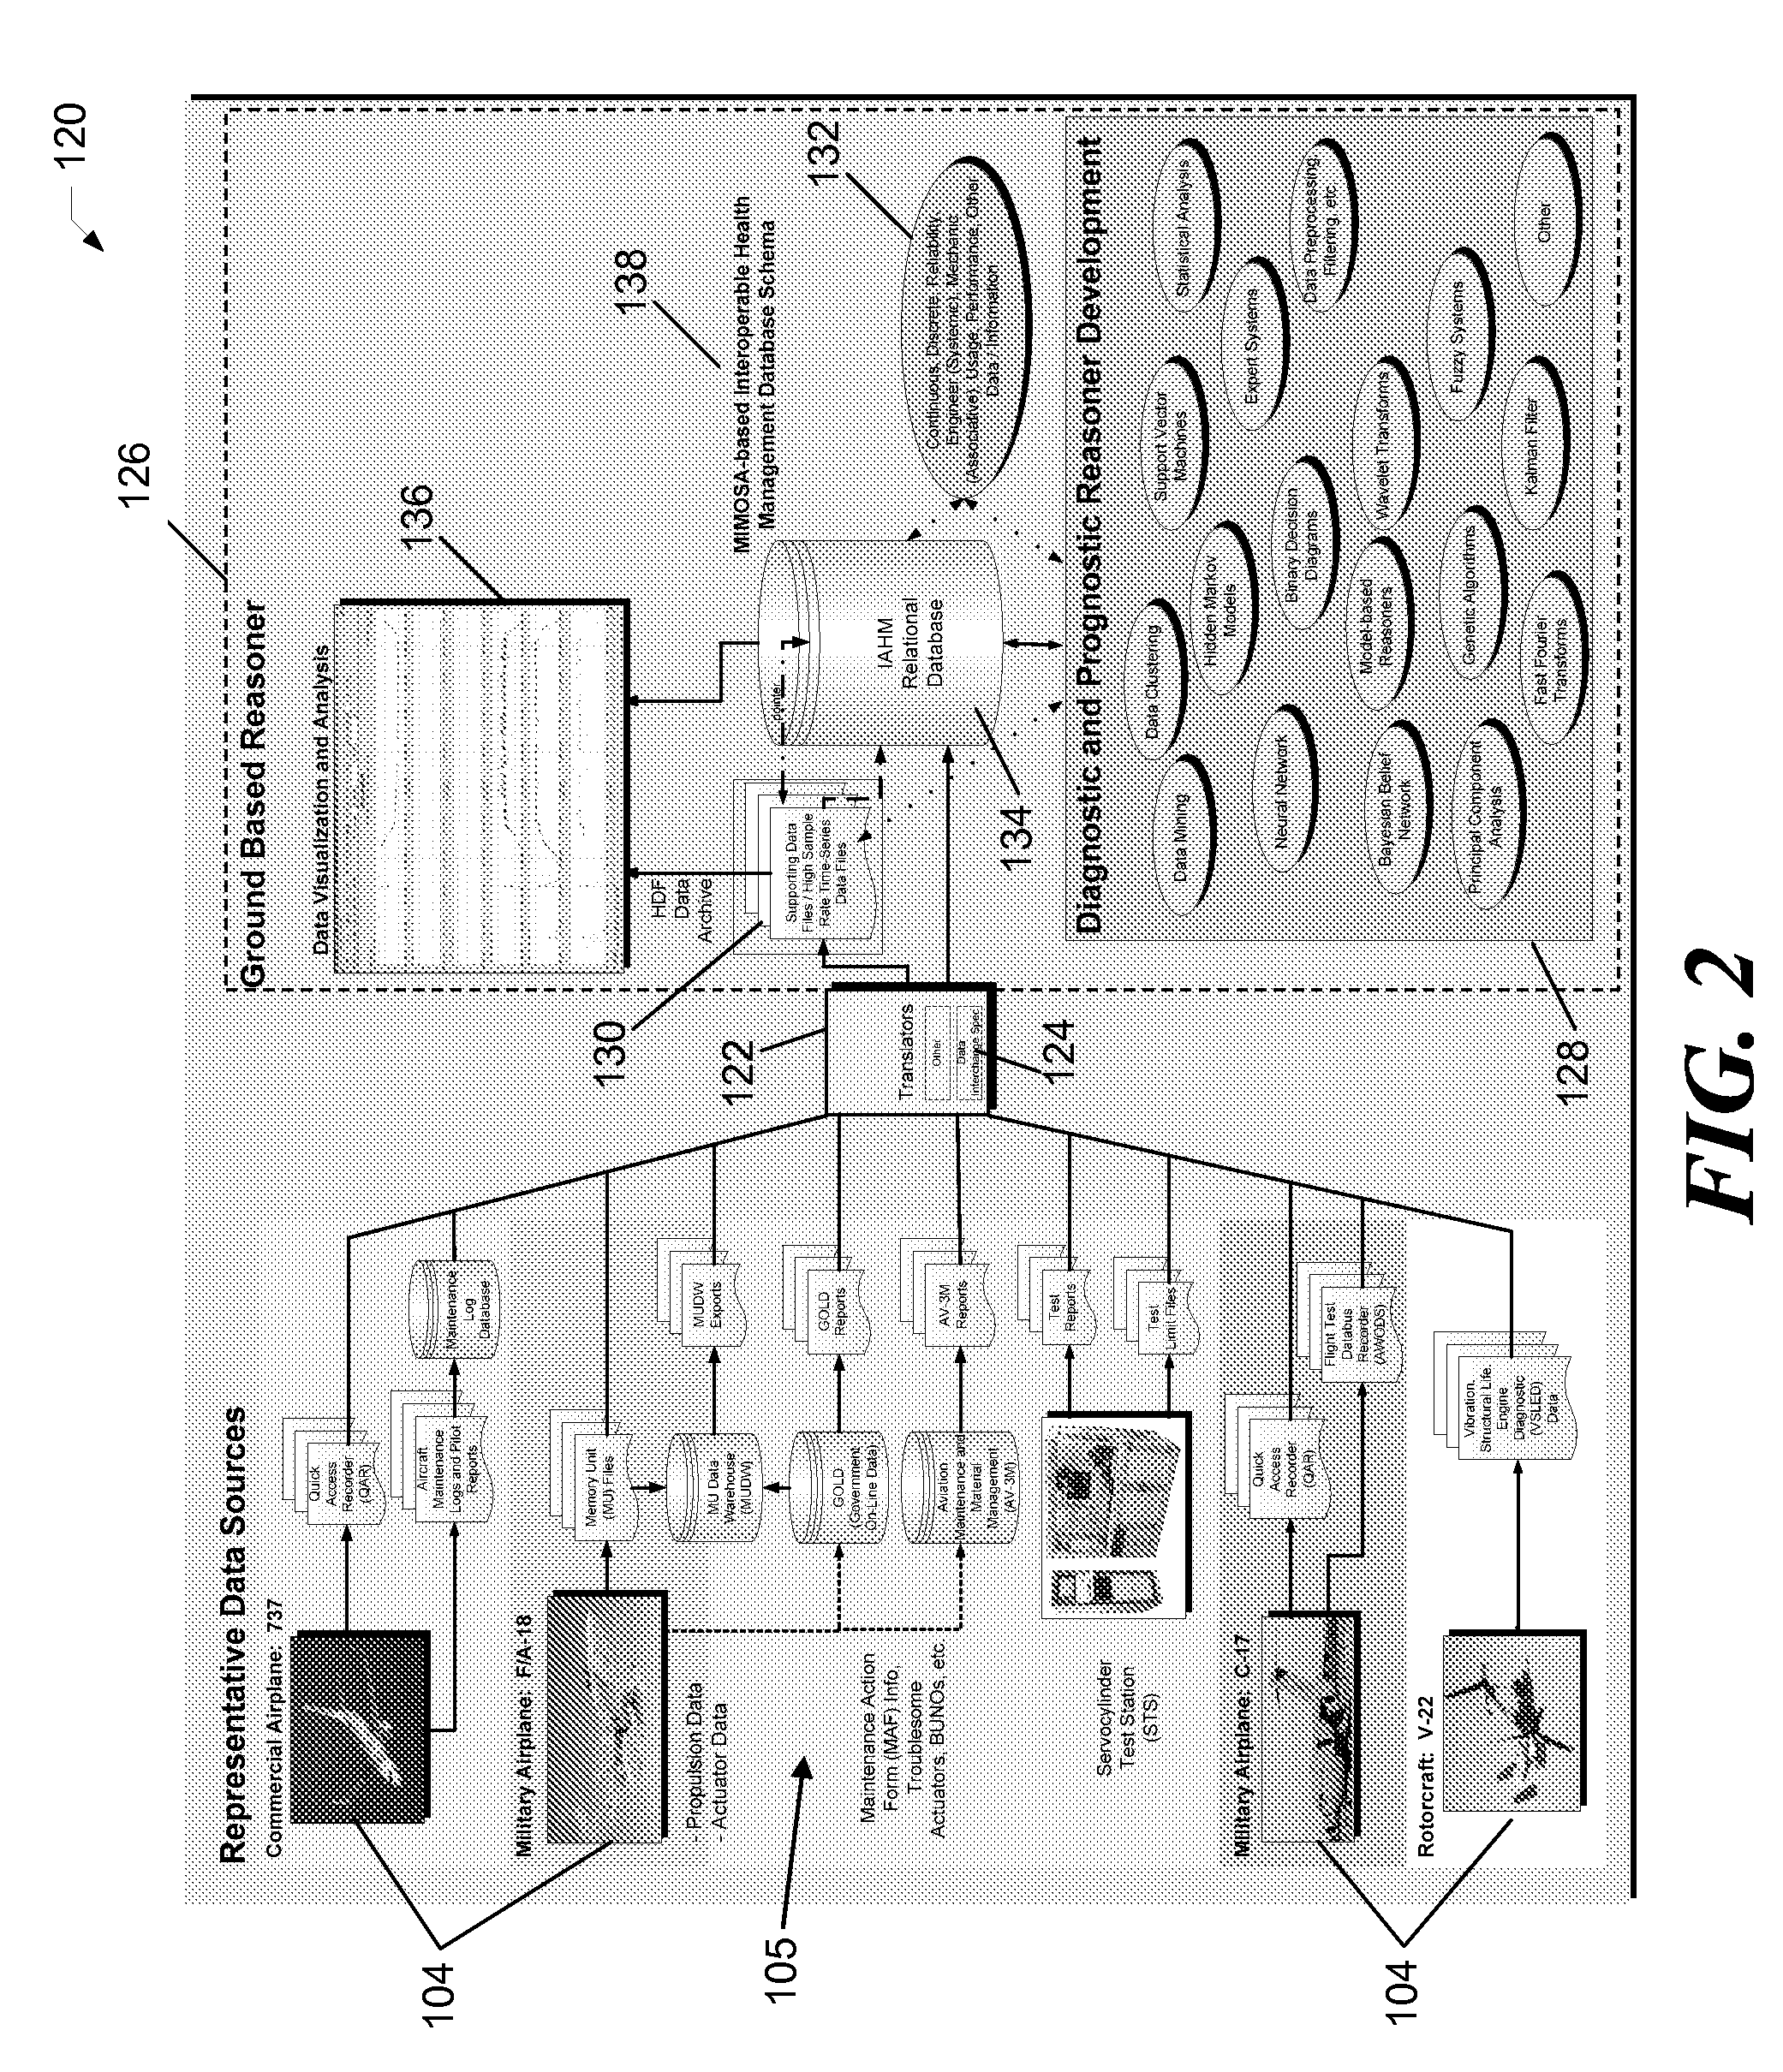 Systems and Methods for Health Management of Single or Multi-Platform Systems